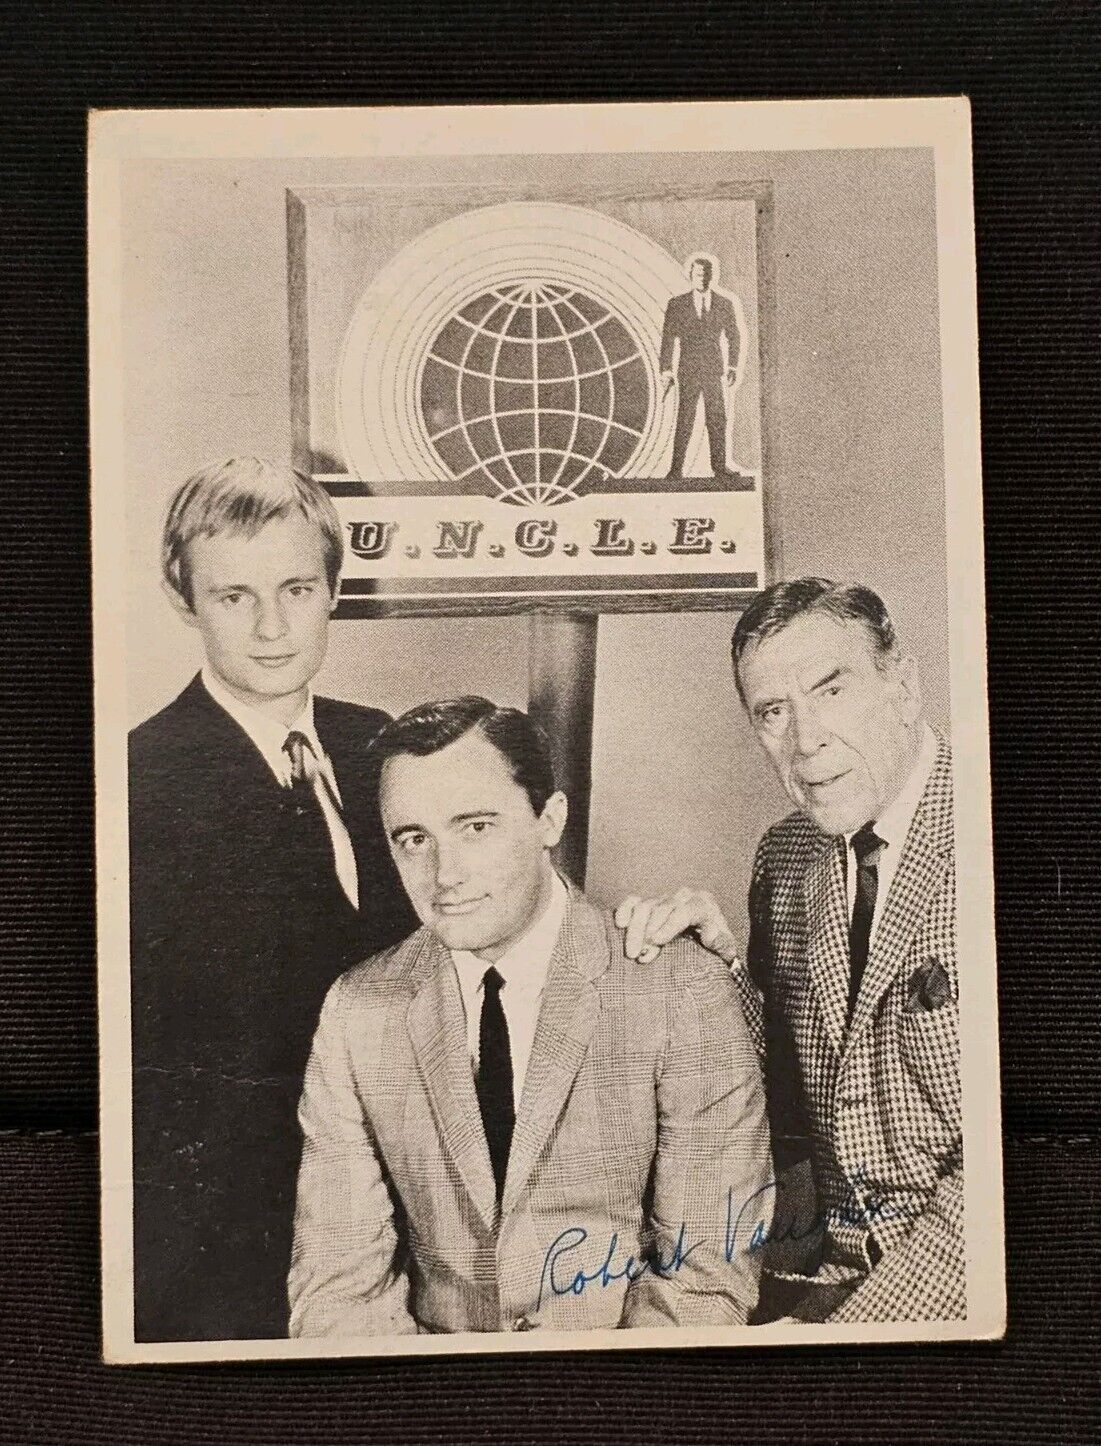 1965 The Man from U.N.C.L.E. #45 Robert Vaughn as Napoleon Solo by Topps